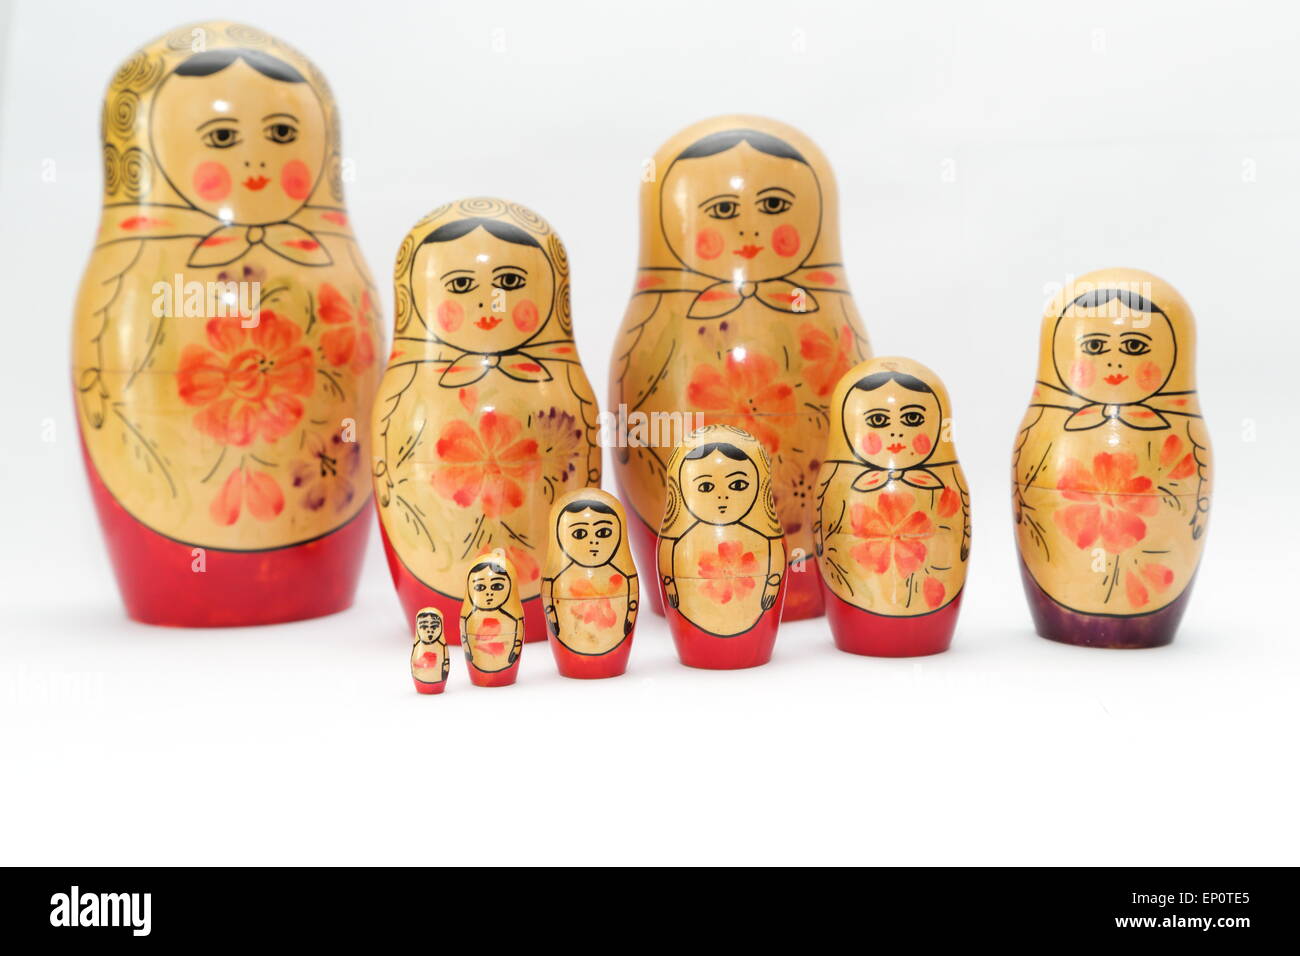 Russian doll, refers to a set of wooden dolls of decreasing size placed one inside the other. Stock Photo